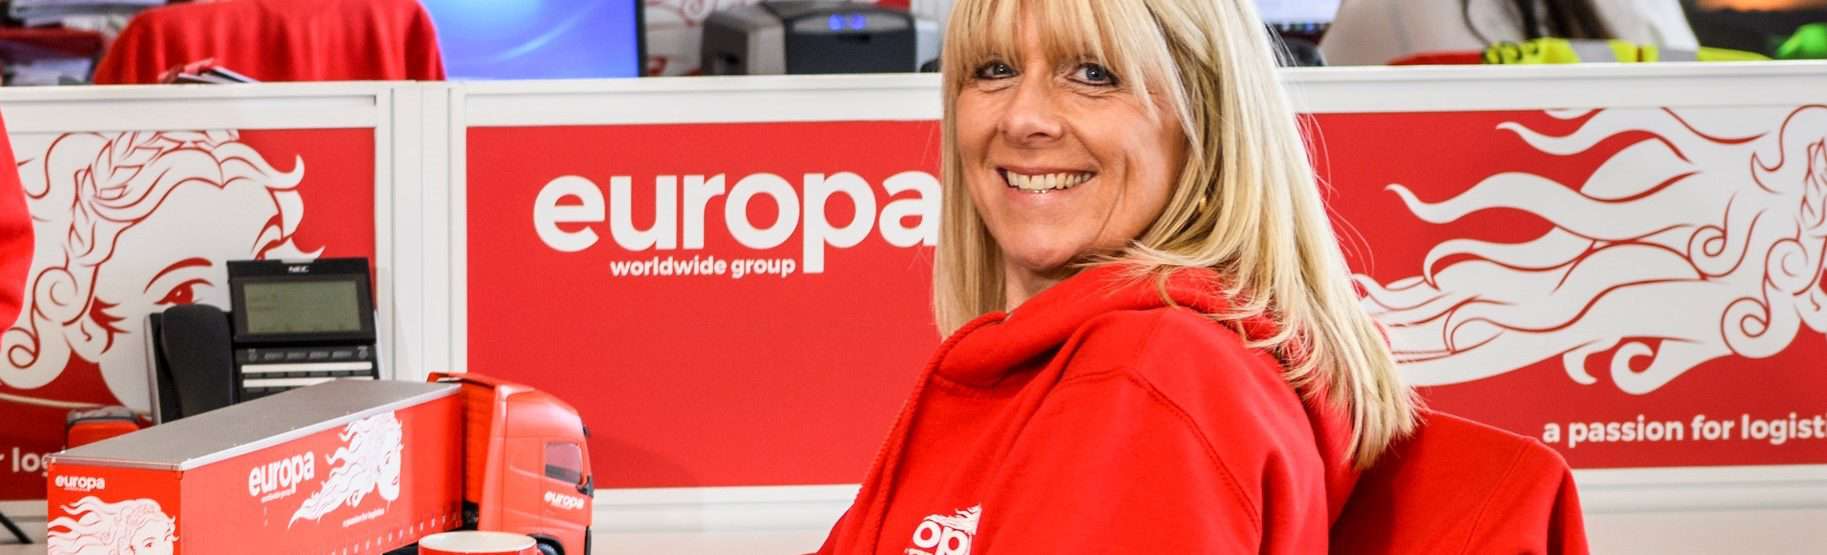 Angie Recce sits in Europa branded red hoodie, smiling at the camera